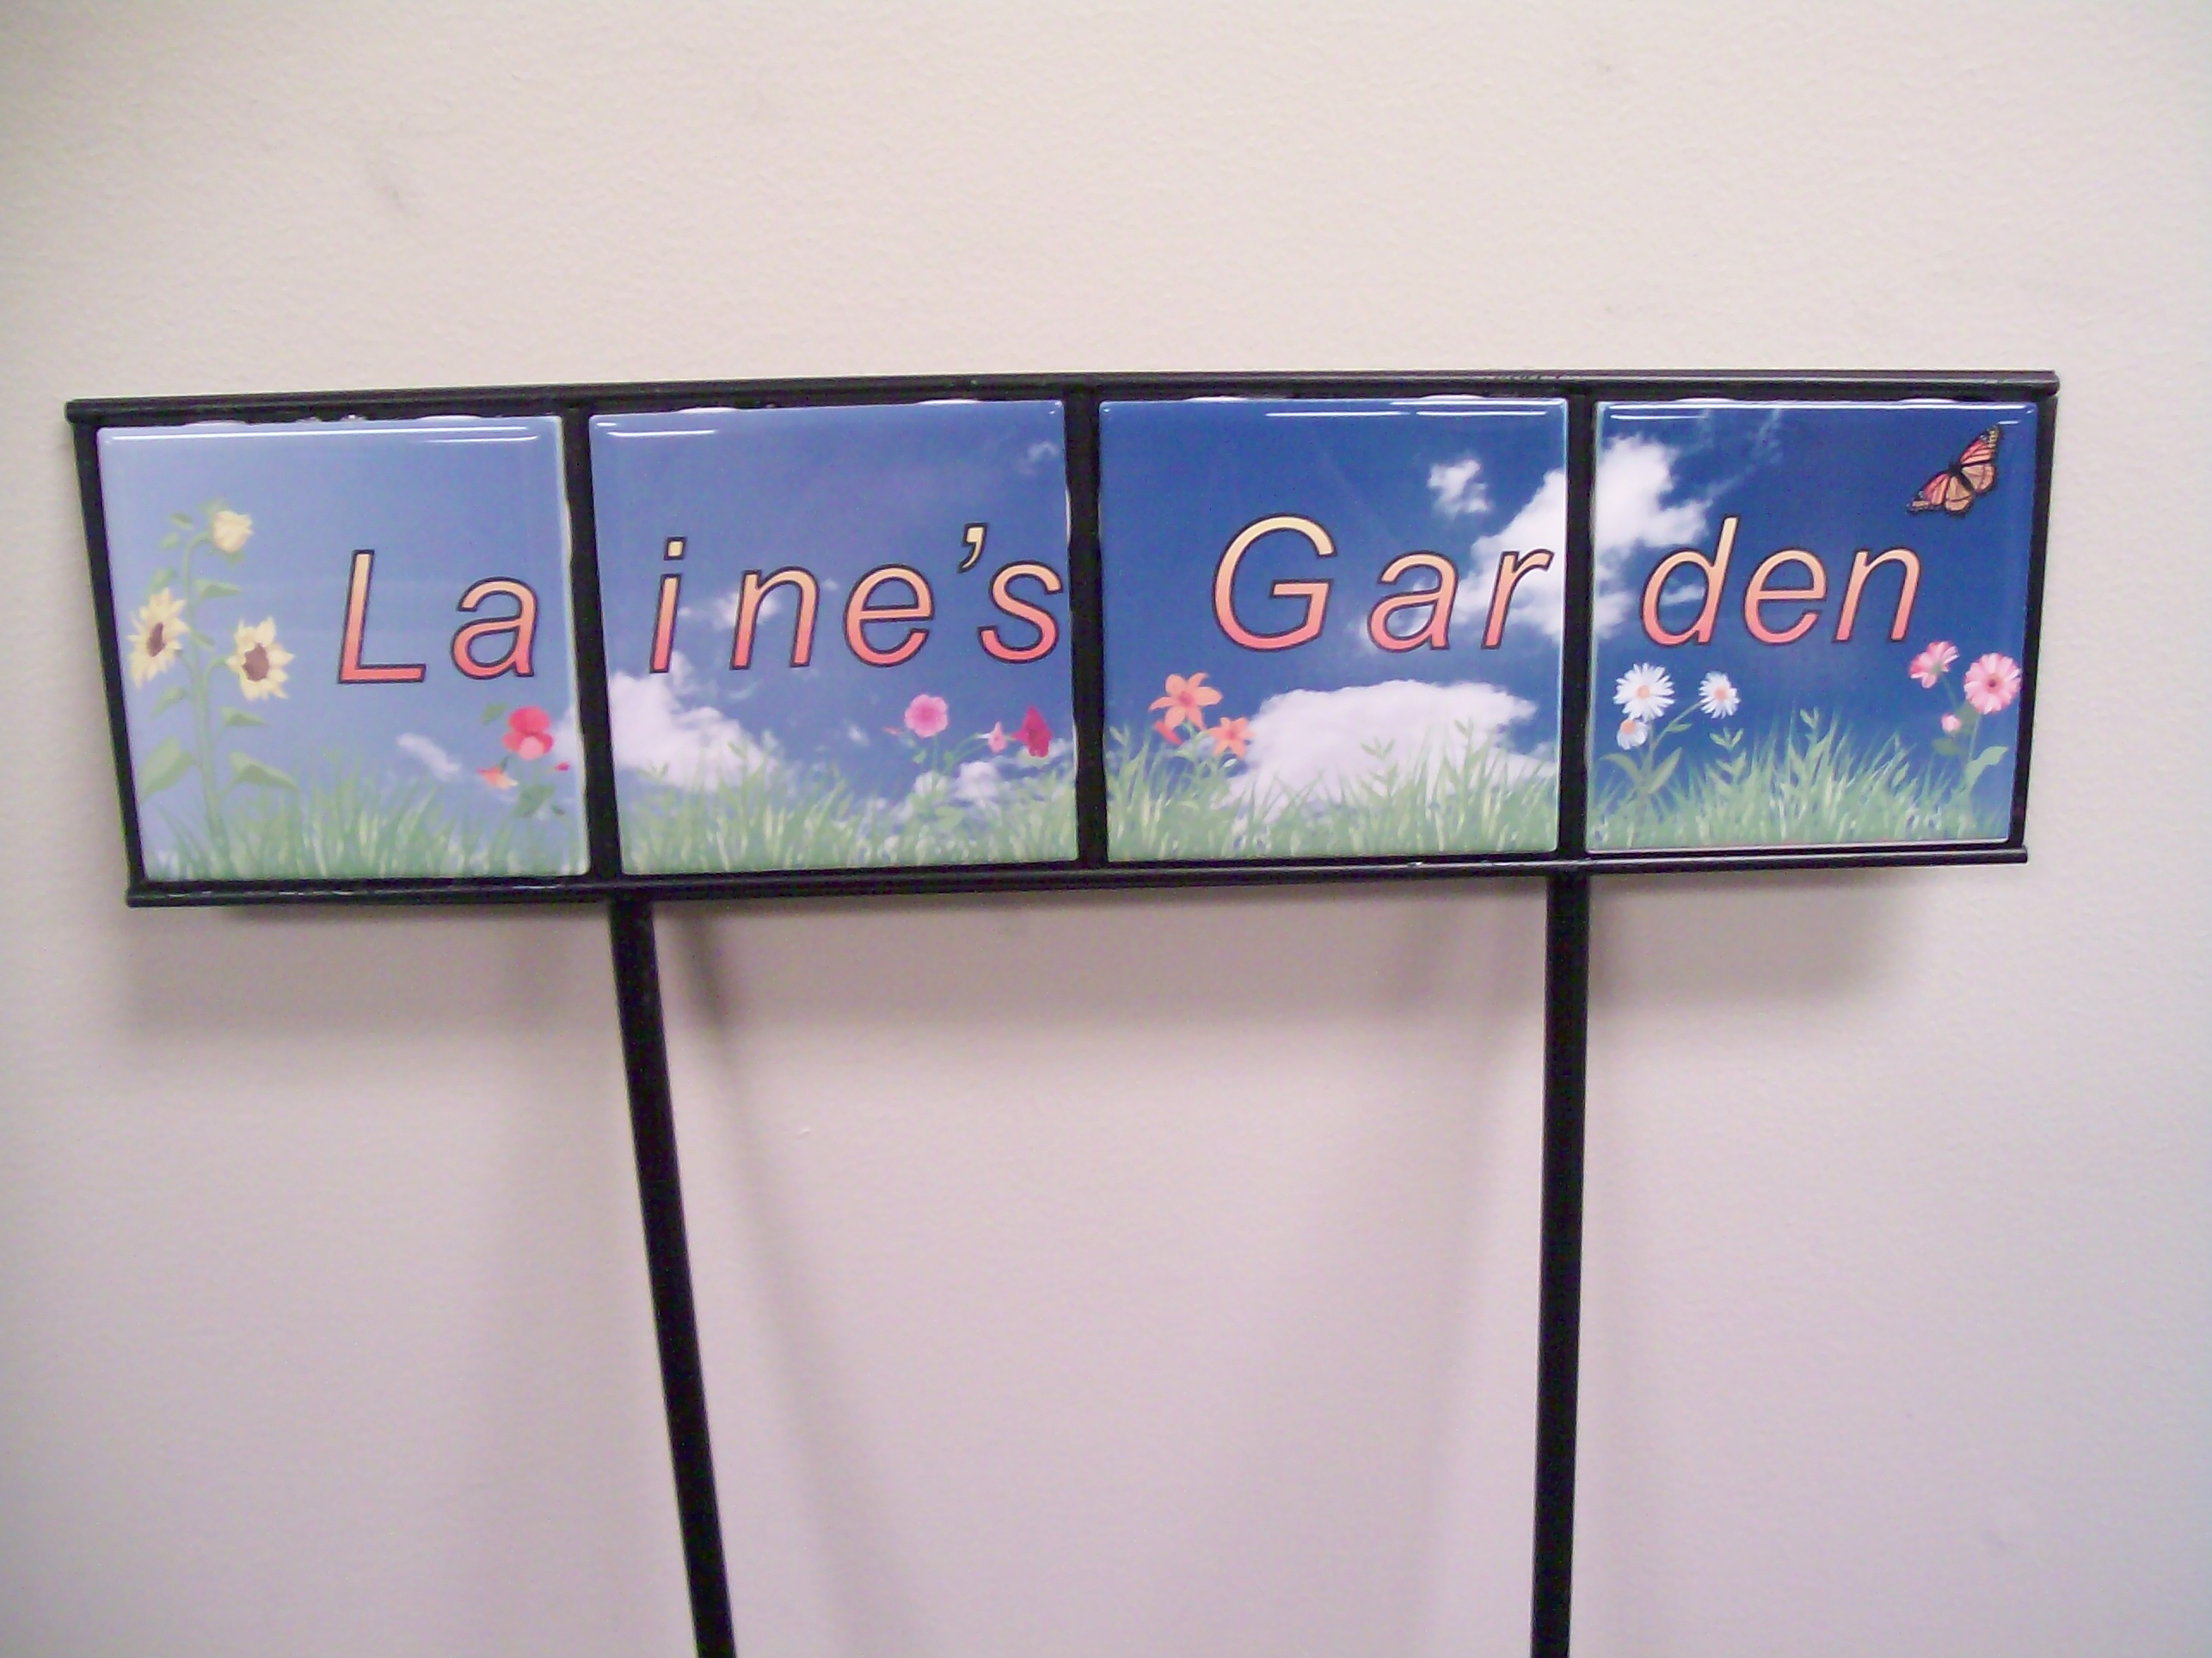 Garden stake made with sublimation printing